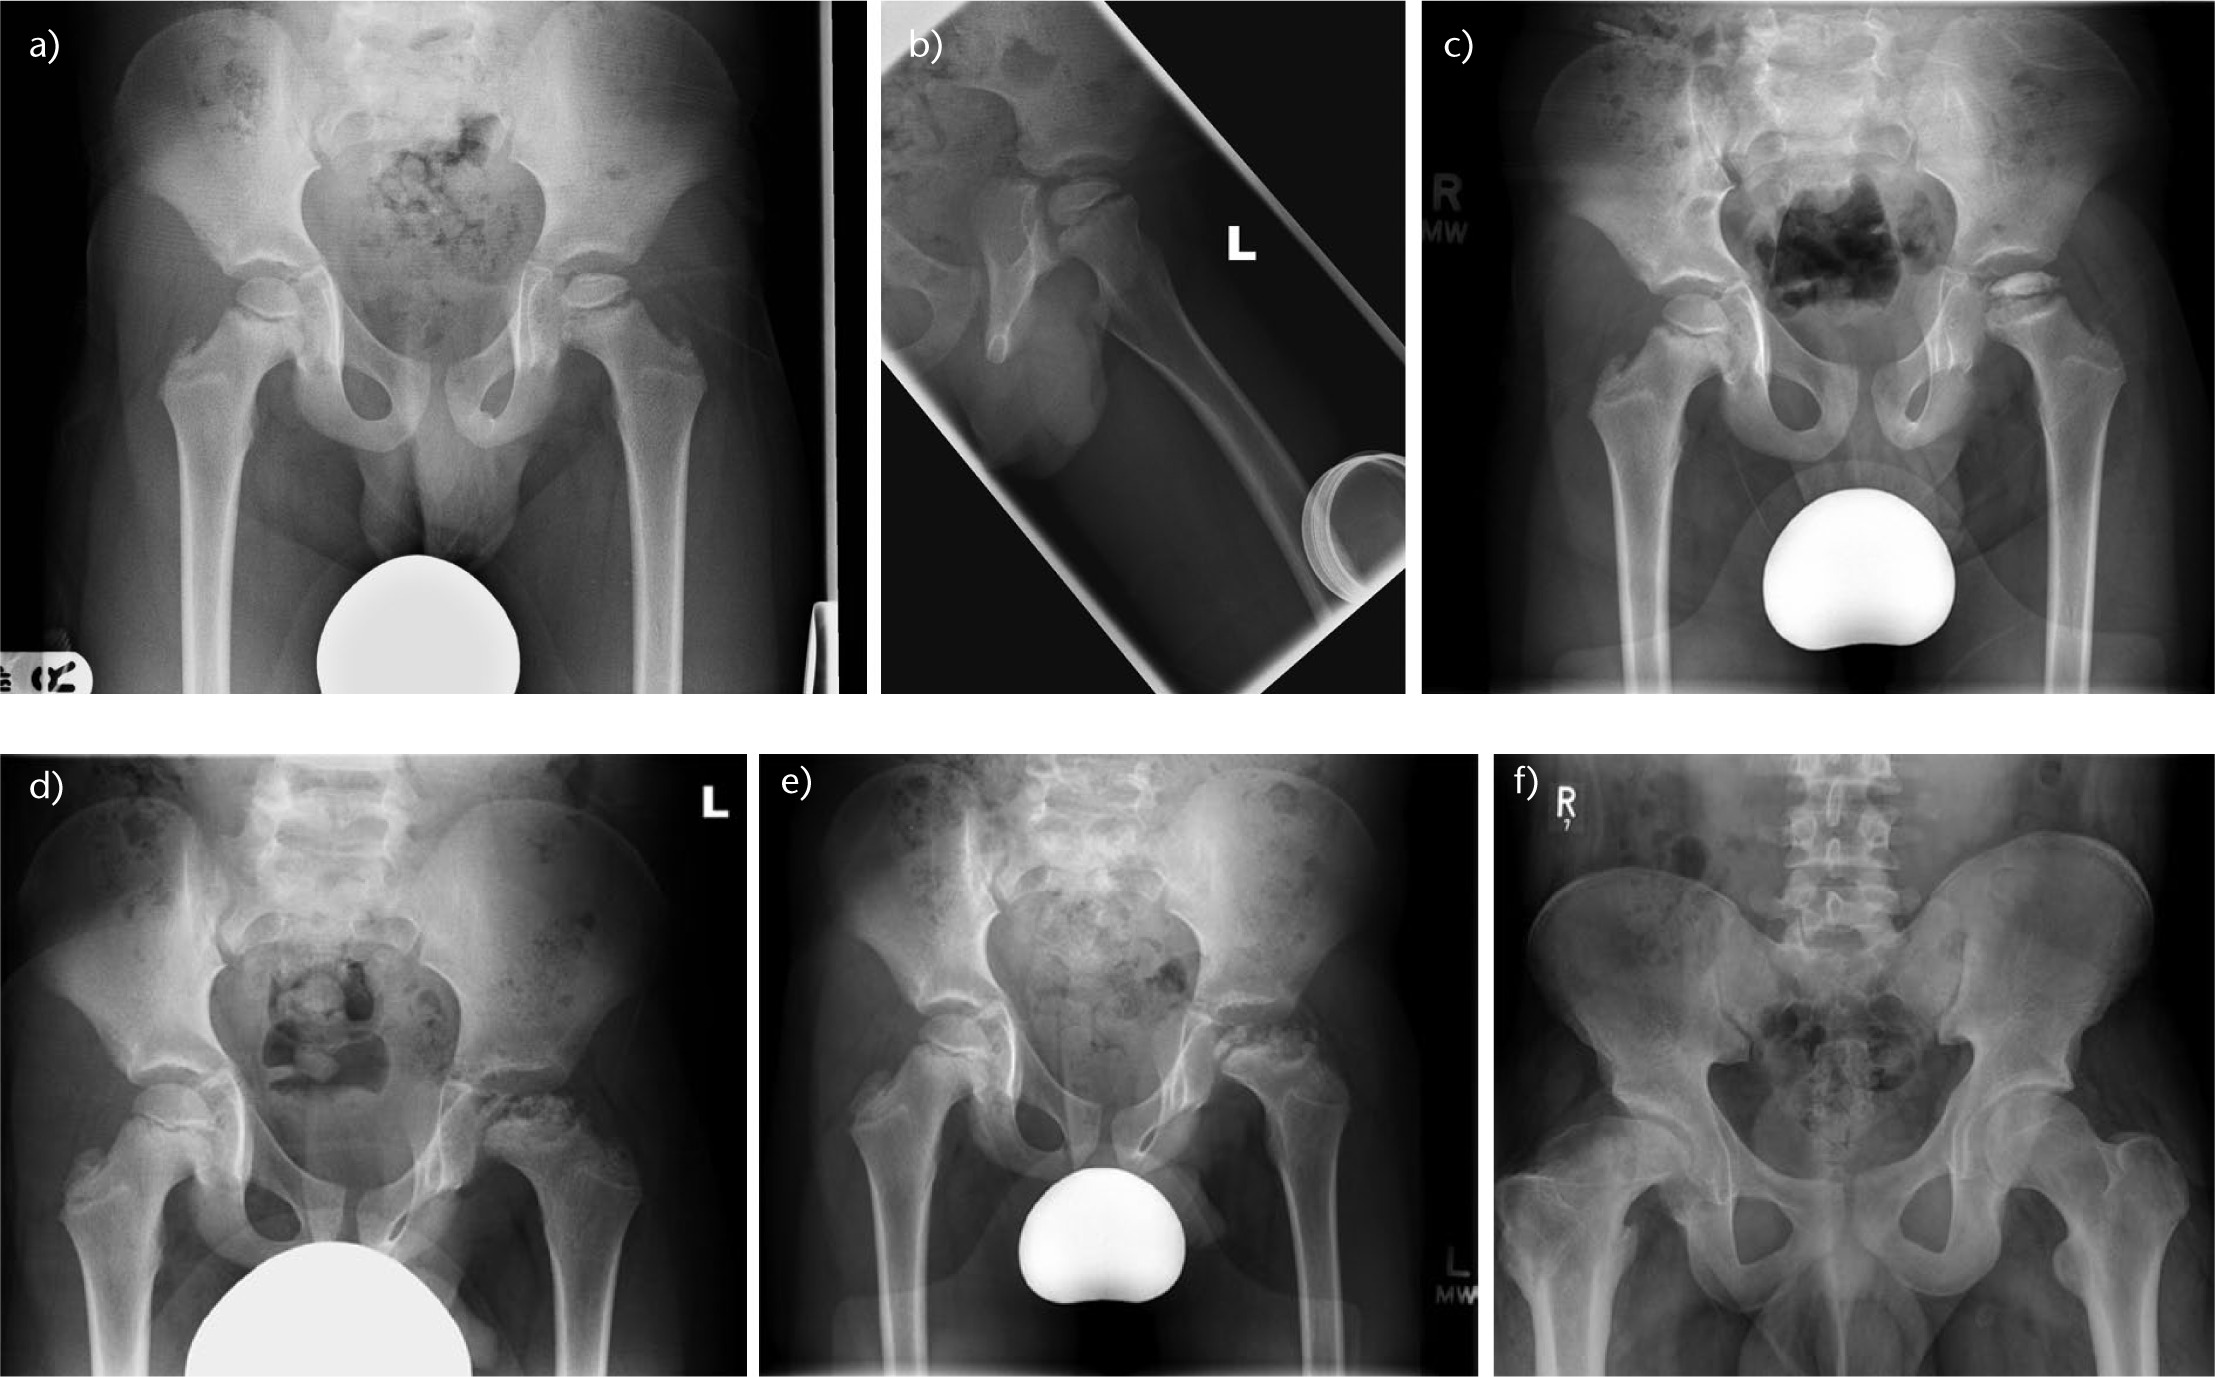 Fig. 1. 
          a) and b) Anteroposterior and lateral pelvic radiographs demonstrating some sclerosis and flattening of the bony epiphysis of the left hip. There is a subchondral fracture line present. c) The same hip three months later with increased sclerosis and collapse of the bony epiphysis. Note that the obturator foramina are asymmetrical and the left ischial spine is visible, indicating that the left hip is lying in significant flexion. d) A further nine months later, the head is now fragmented. The hip still lies in flexion. e) After another nine months, the head is now healing with smoothing of the bony epiphyseal contour, particularly medially. f) A different patient with healed right sided Perthes disease.
        